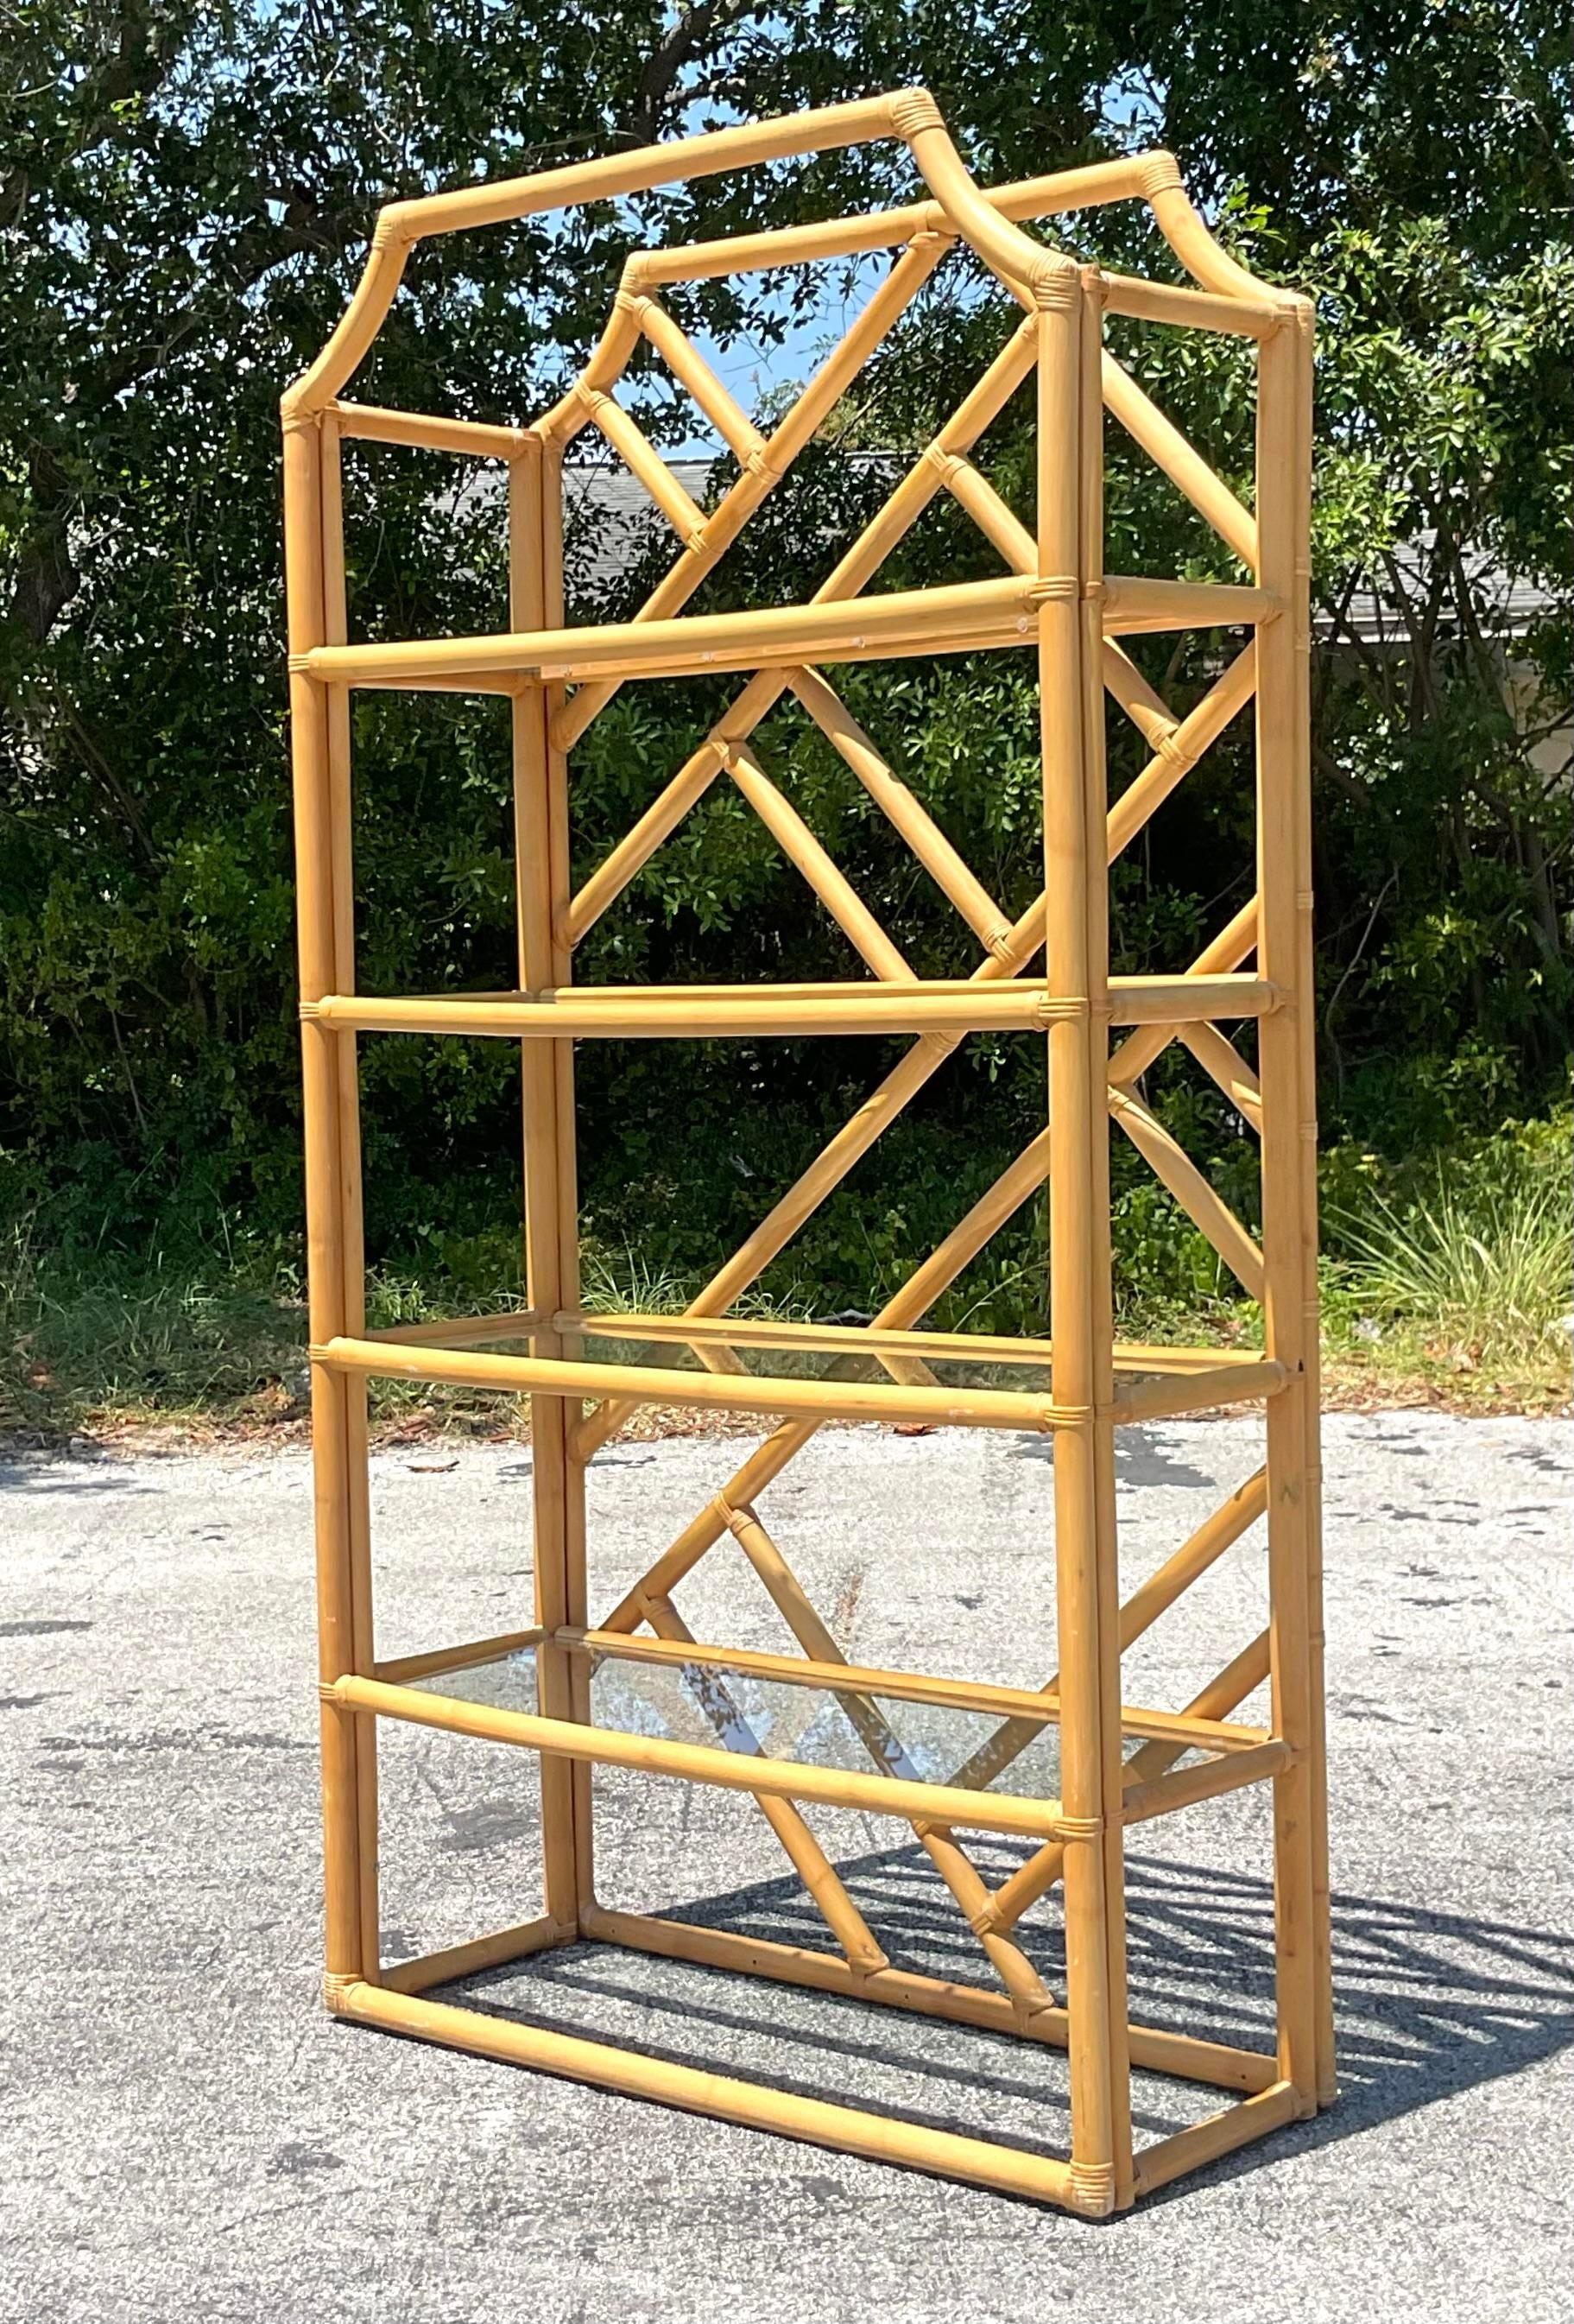 Showcase coastal elegance with our Vintage Coastal Chinese Chippendale Rattan Etagere. This stunning piece combines the intricate design of Chinese Chippendale with the natural appeal of rattan, capturing a blend of American sophistication and